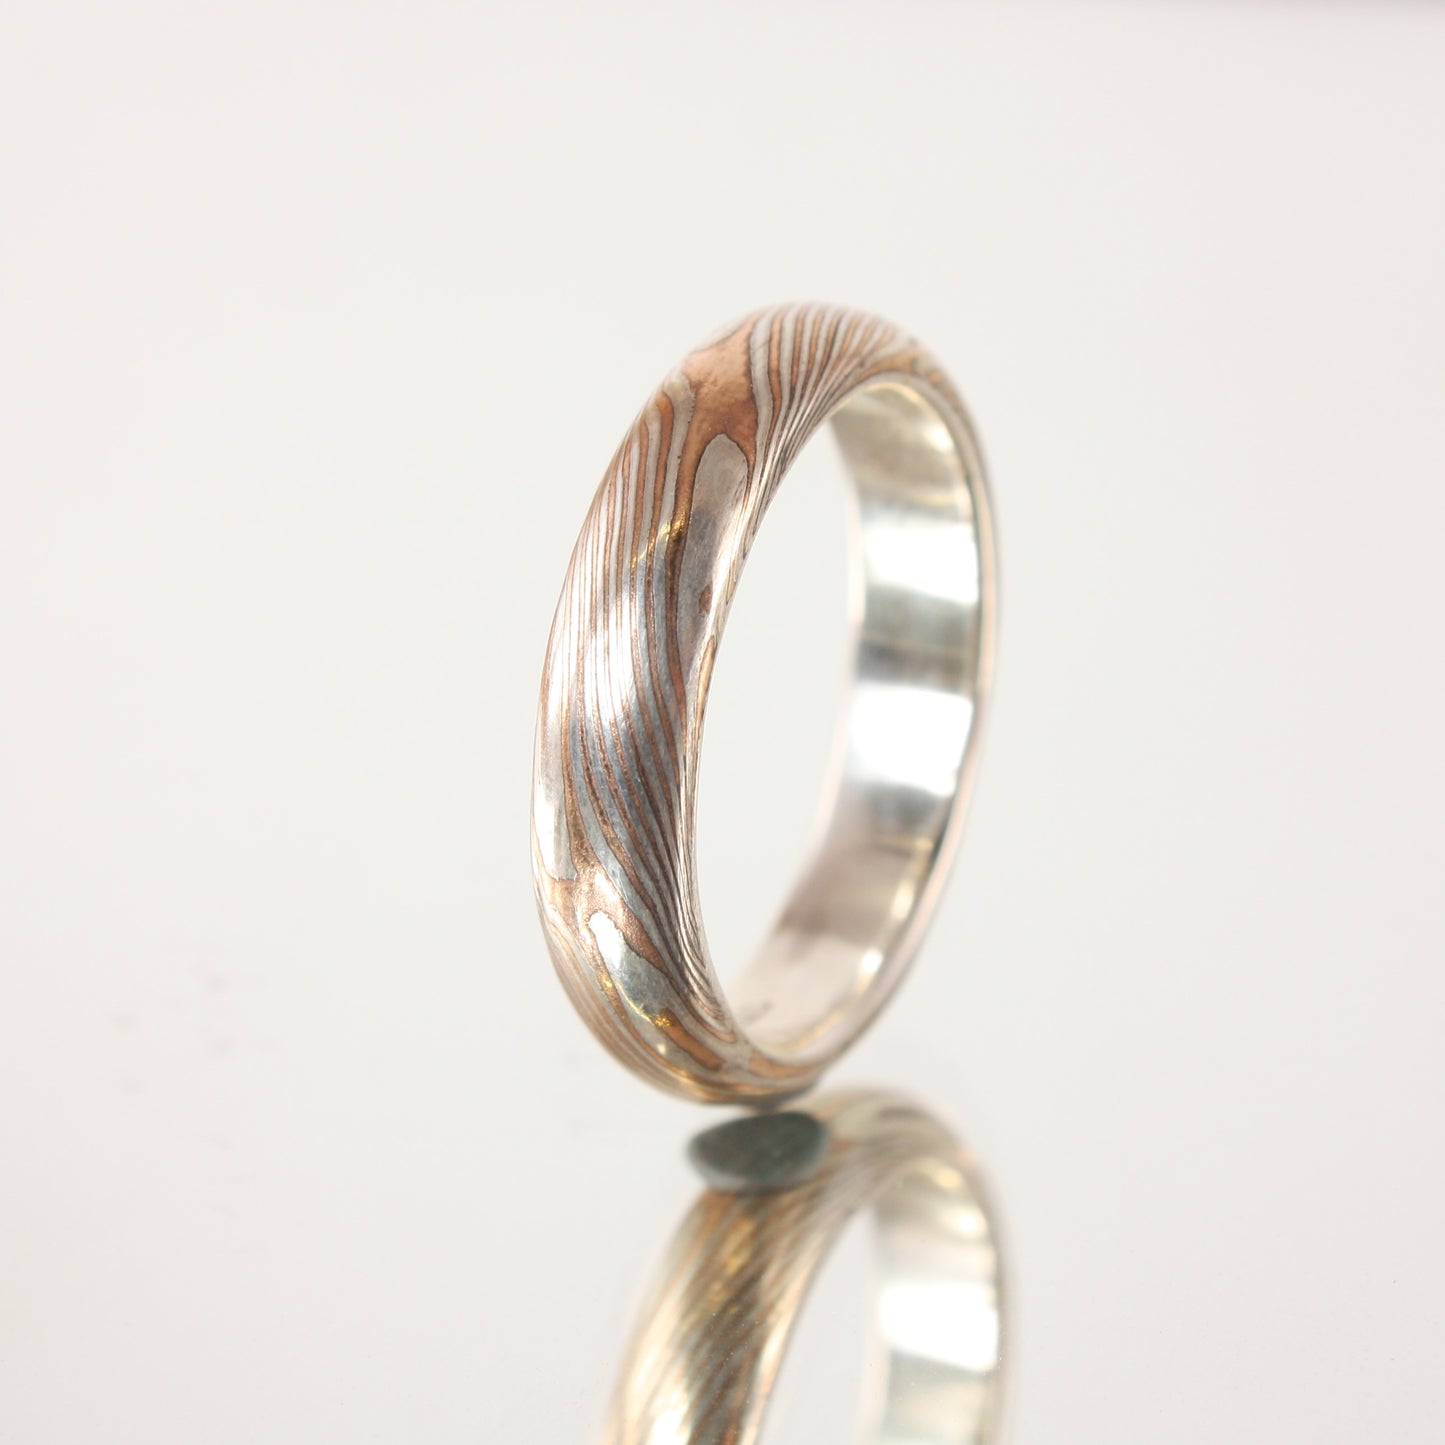 Made To Order Silver and Bronze Mokume Gane Rings